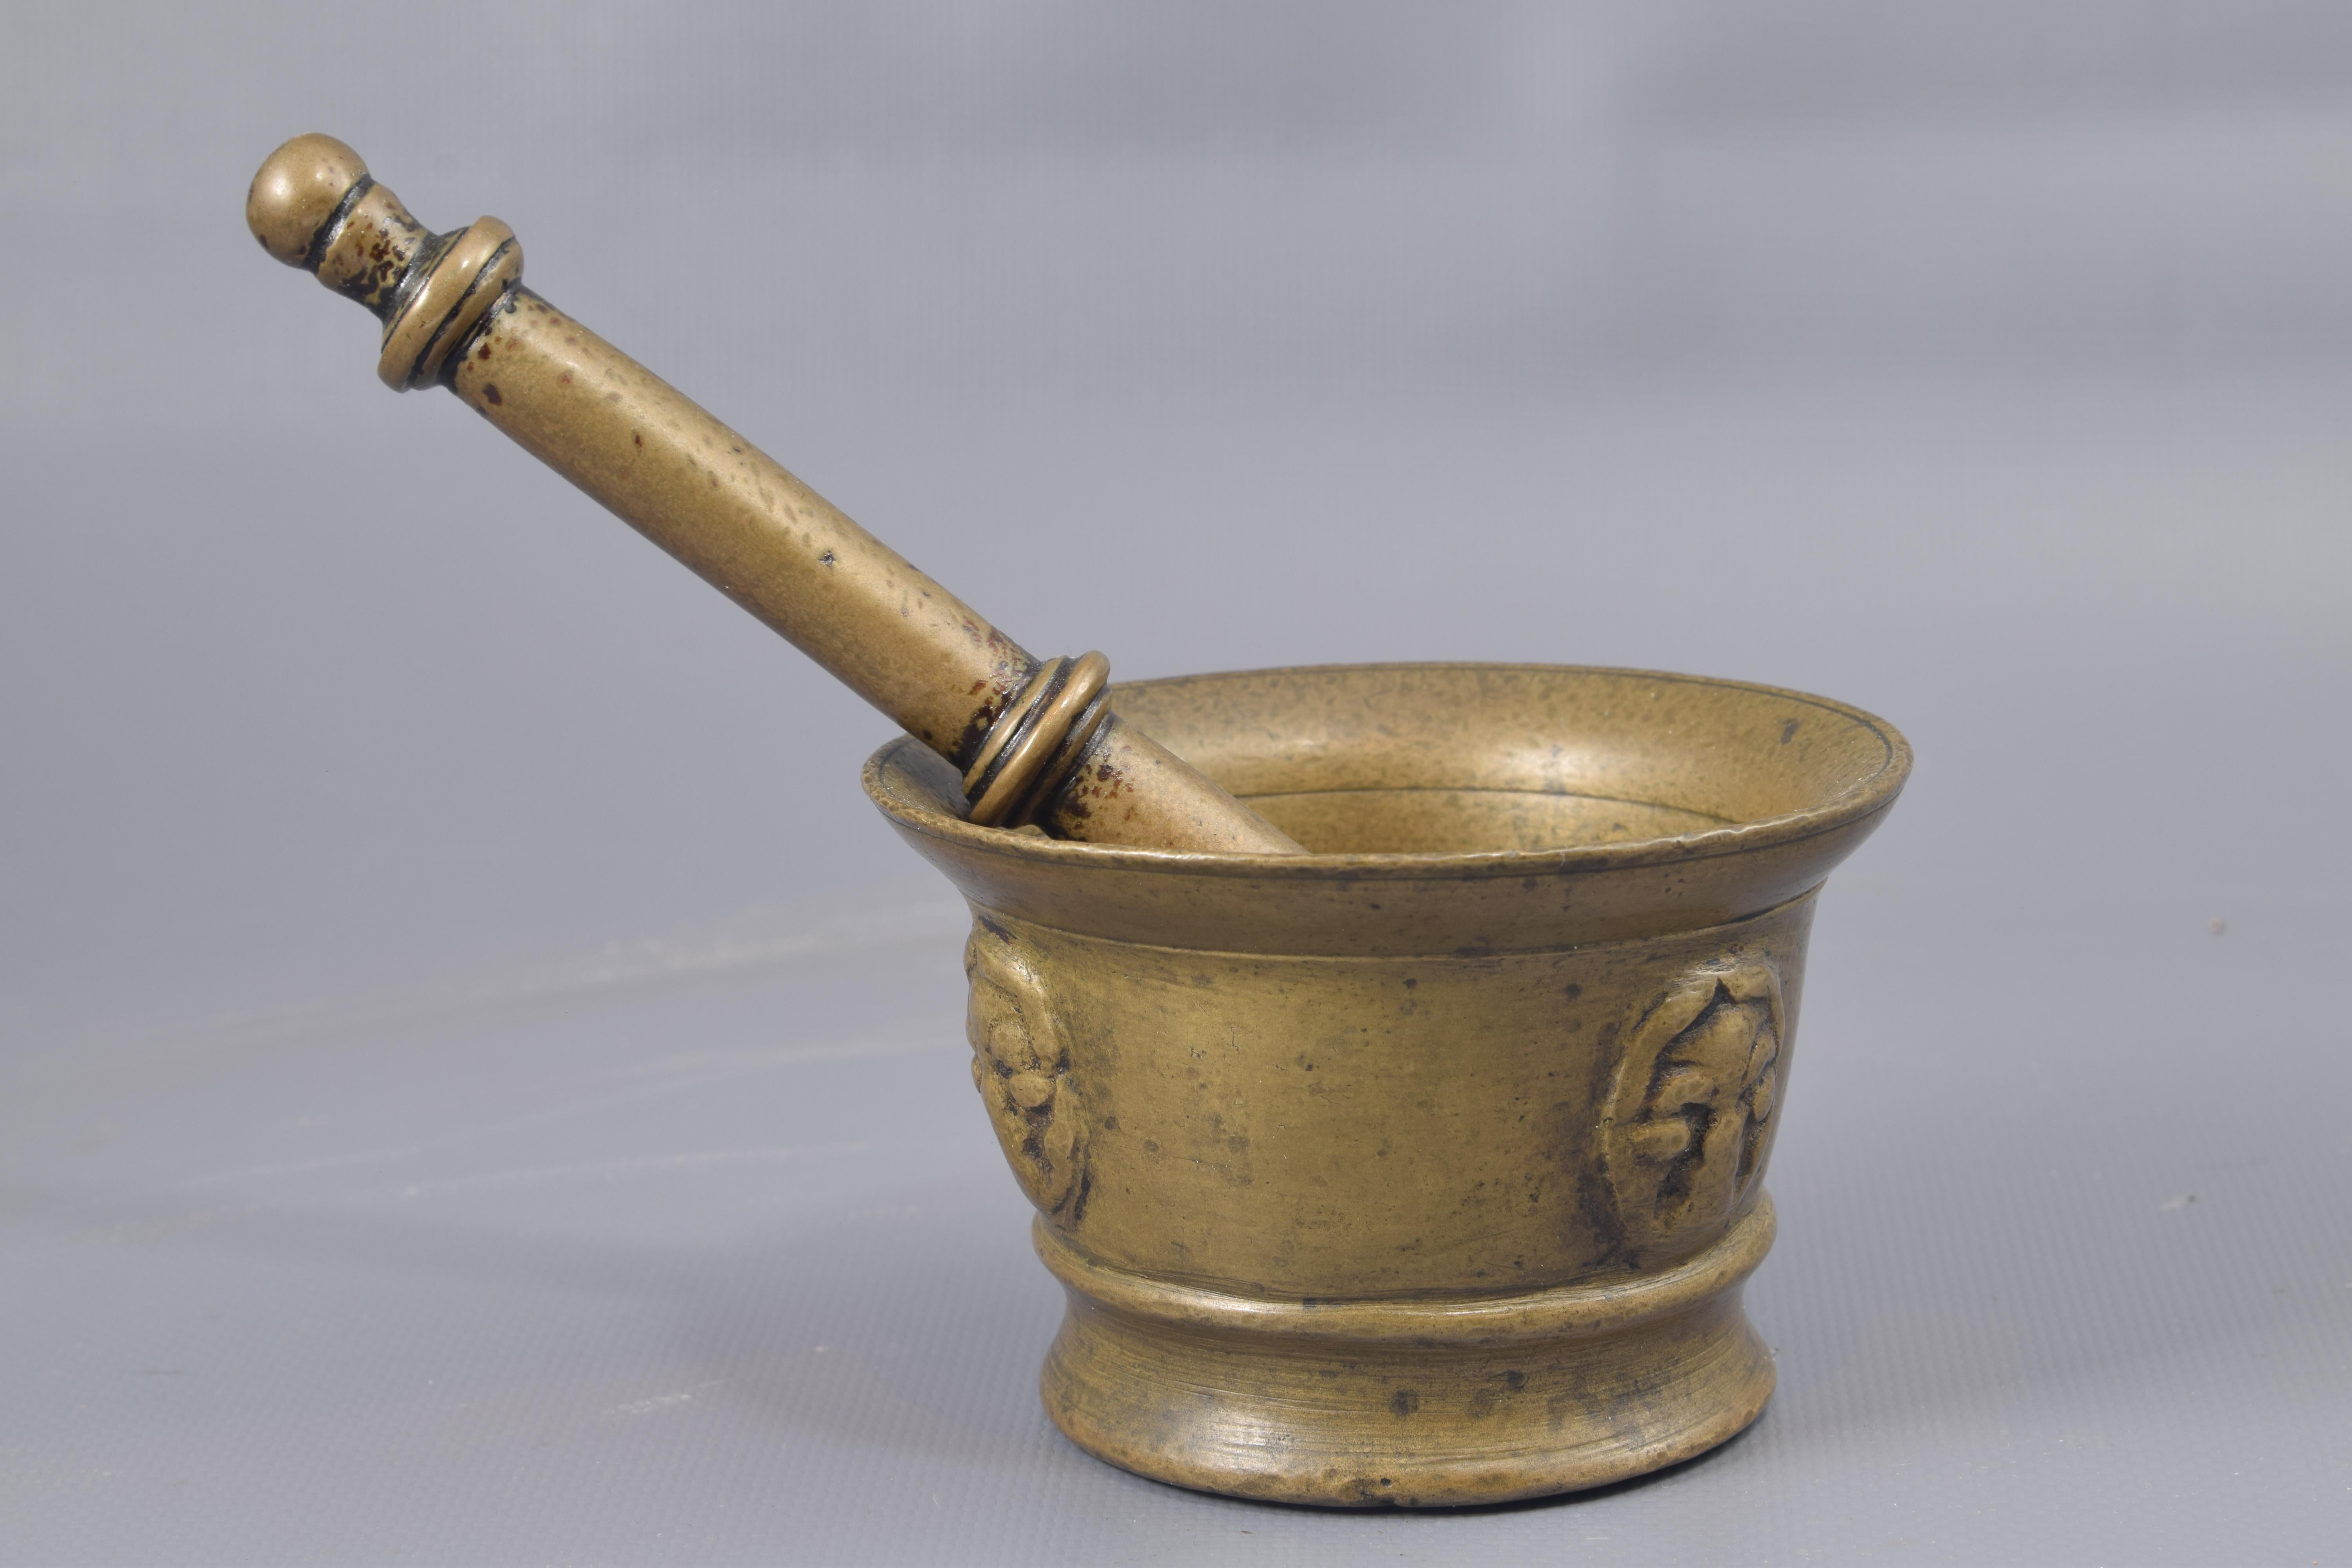 Baroque Mortar with Mace or Pestle, Bronze, 17th Century